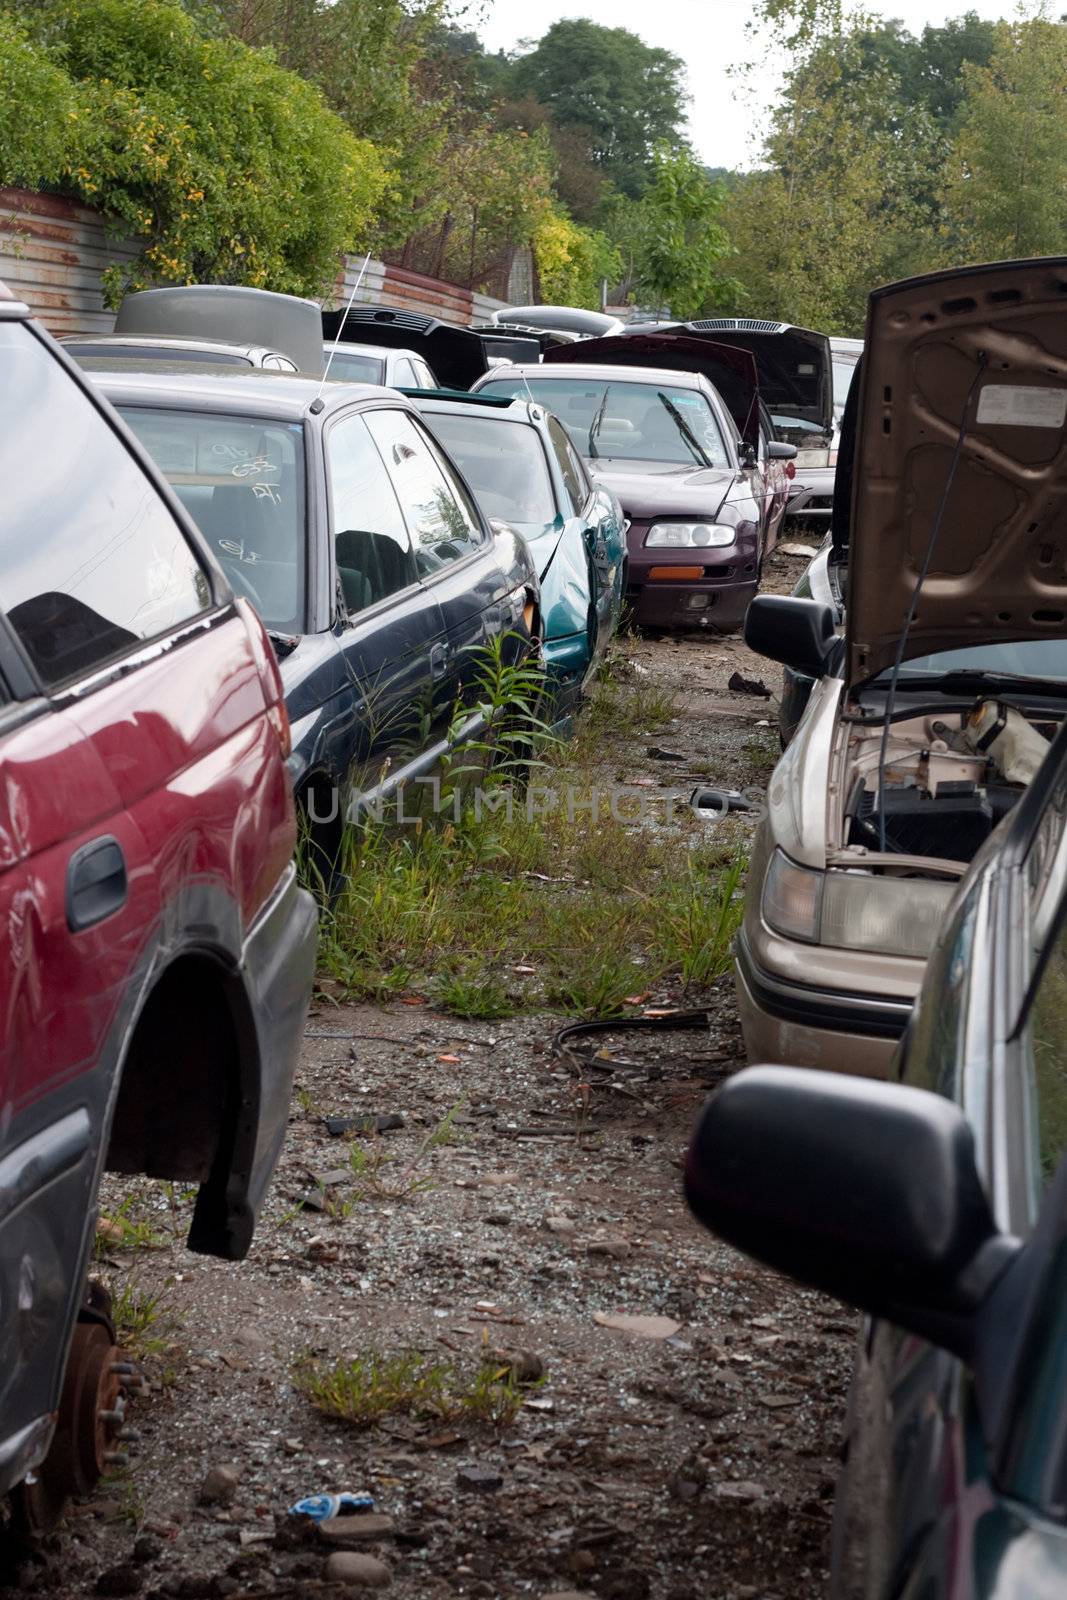 View of the rows of old junked cars in an automotive salvage yard. 